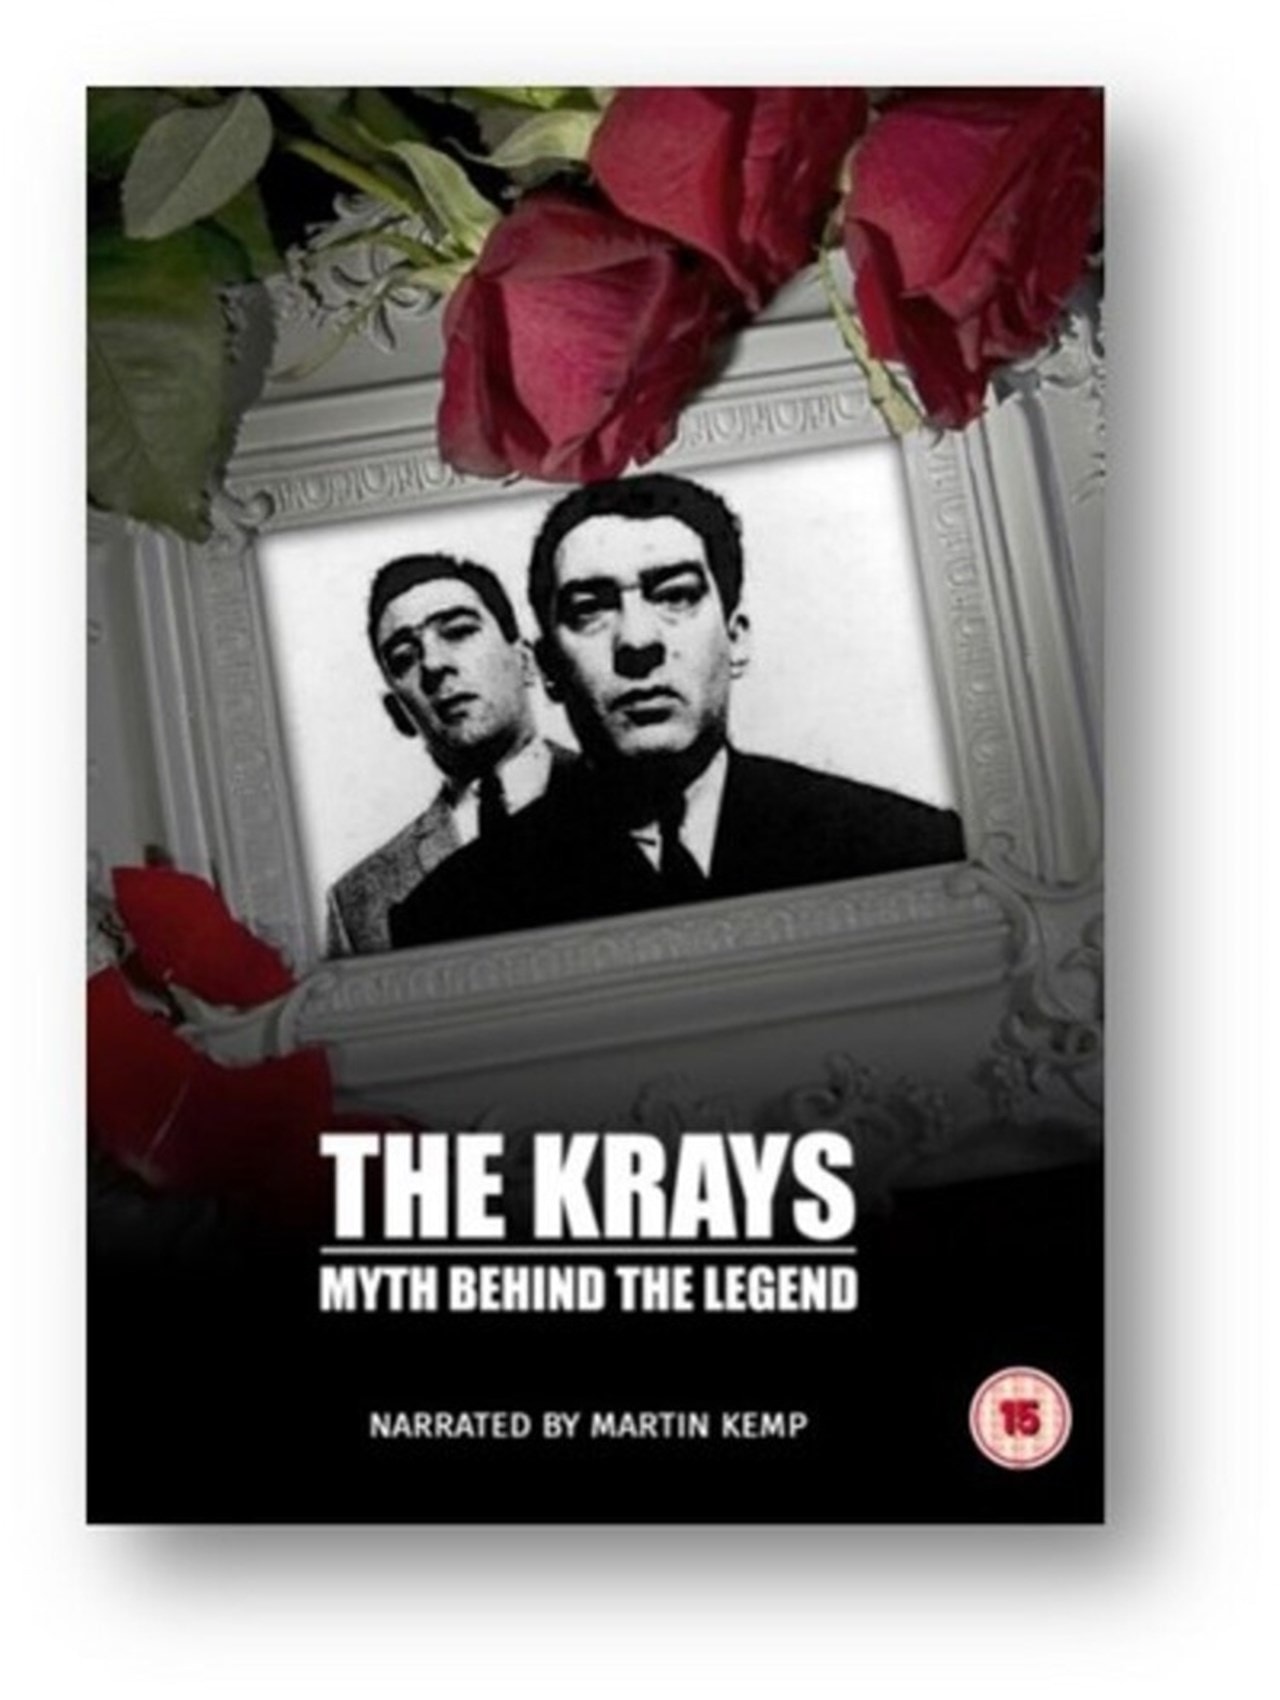 The Krays Myth Behind the Legend DVD Free shipping over £20 HMV